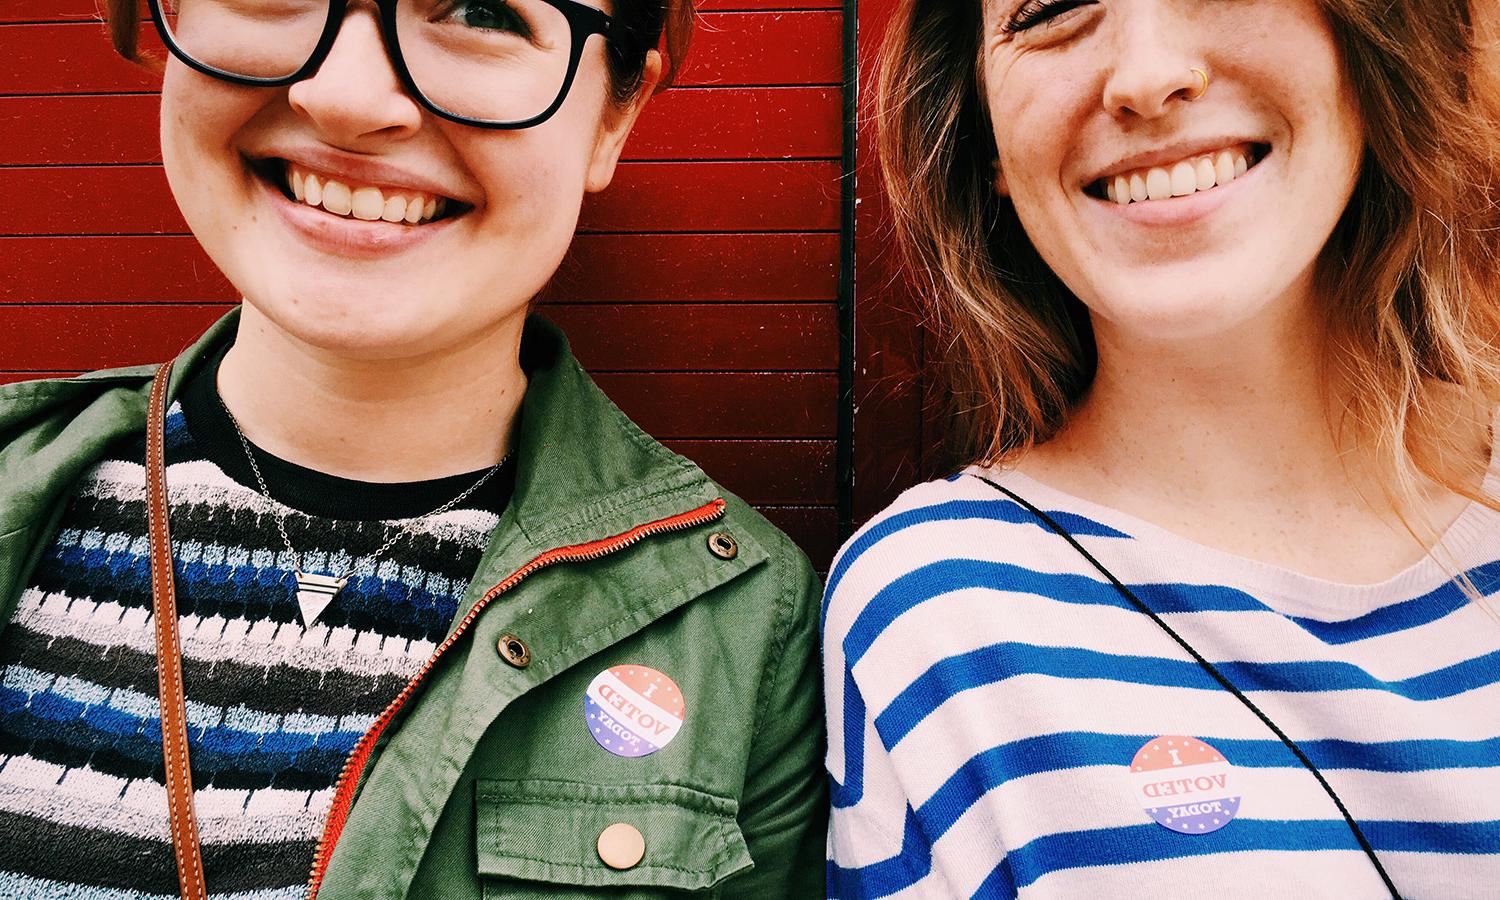 Two Young Women Votes